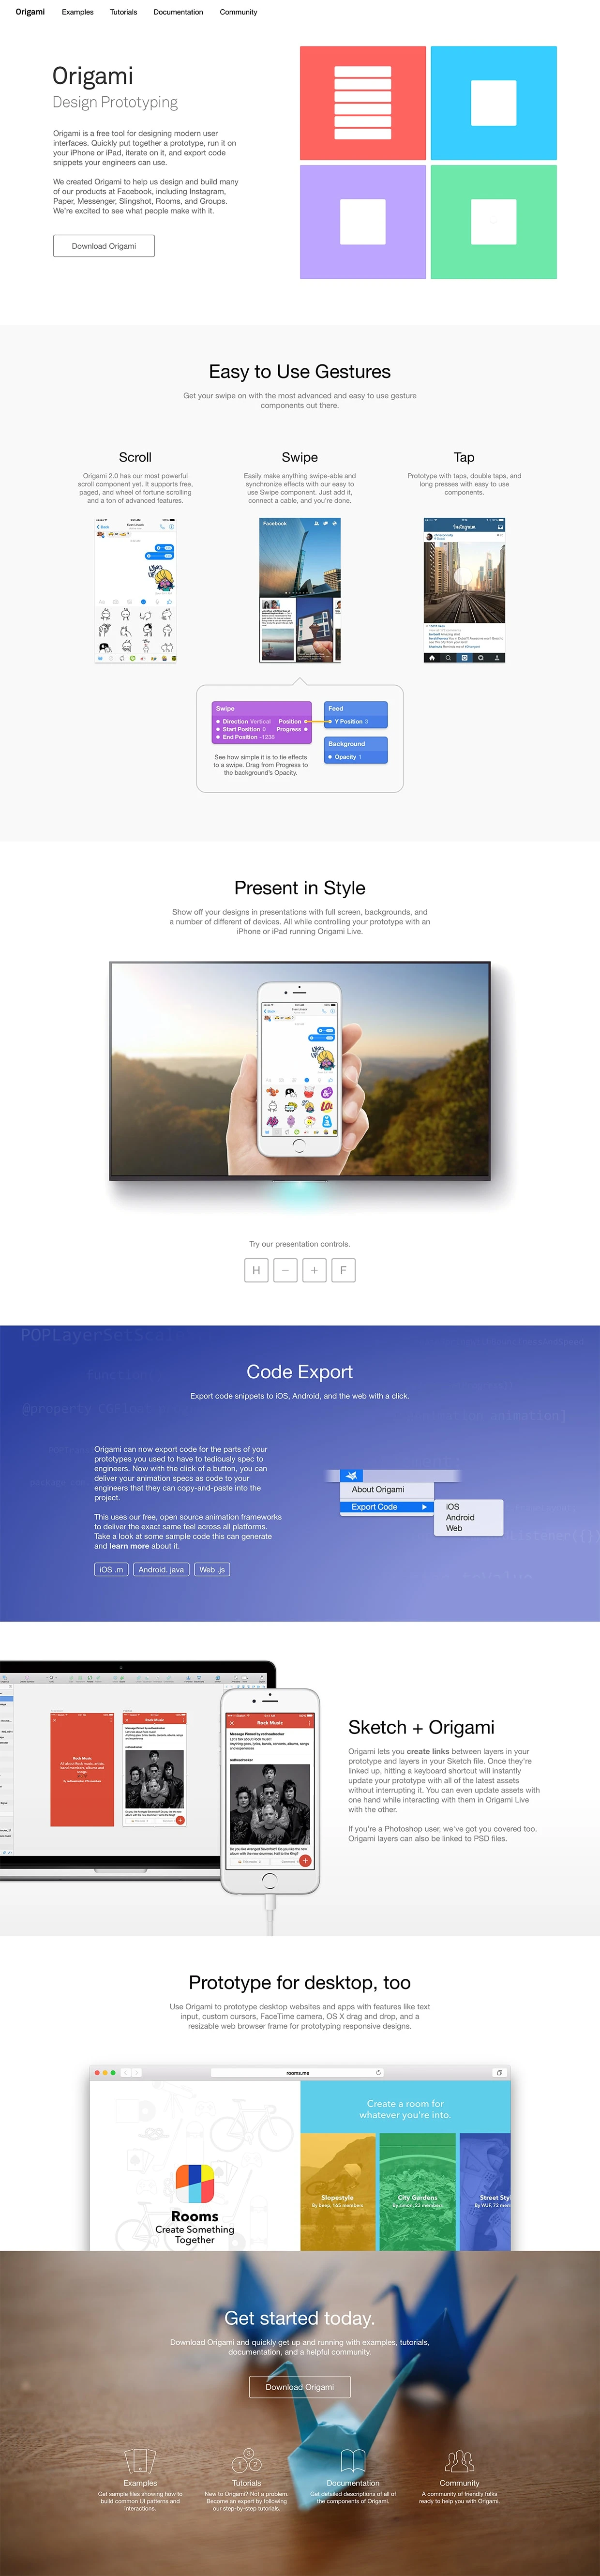 Origami Landing Page Example: Origami is a free tool for designing modern user interfaces.